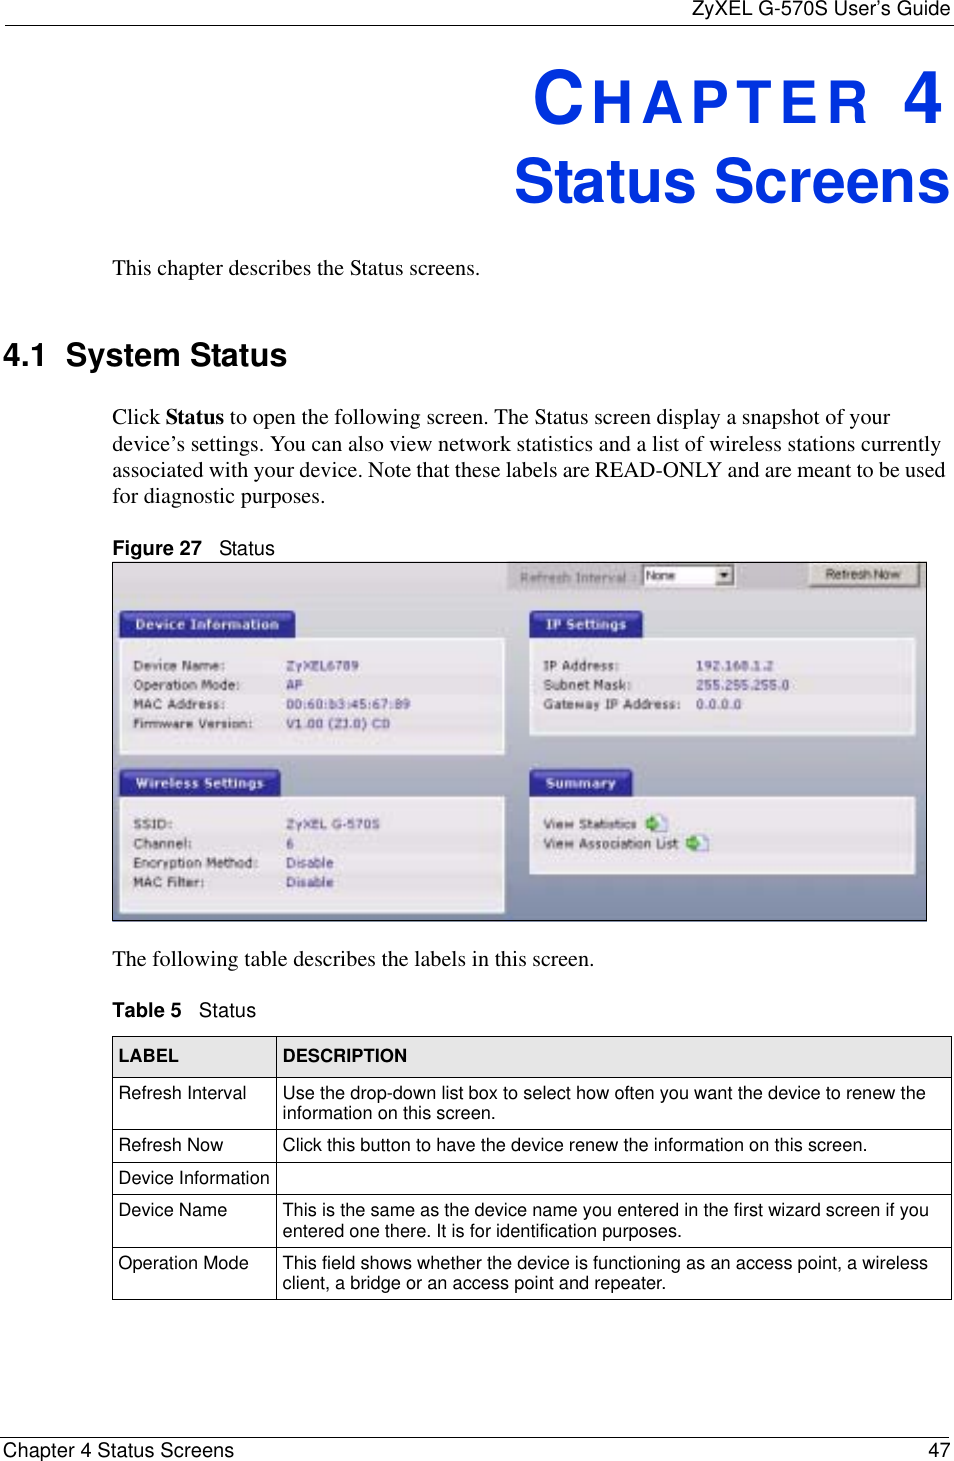 ZyXEL G-570S User’s GuideChapter 4 Status Screens 47CHAPTER 4Status ScreensThis chapter describes the Status screens.4.1  System Status Click Status to open the following screen. The Status screen display a snapshot of your device’s settings. You can also view network statistics and a list of wireless stations currently associated with your device. Note that these labels are READ-ONLY and are meant to be used for diagnostic purposes.Figure 27   StatusThe following table describes the labels in this screen.     Table 5   StatusLABEL DESCRIPTIONRefresh Interval Use the drop-down list box to select how often you want the device to renew the information on this screen.Refresh Now Click this button to have the device renew the information on this screen.Device InformationDevice Name This is the same as the device name you entered in the first wizard screen if you entered one there. It is for identification purposes.Operation Mode This field shows whether the device is functioning as an access point, a wireless client, a bridge or an access point and repeater.